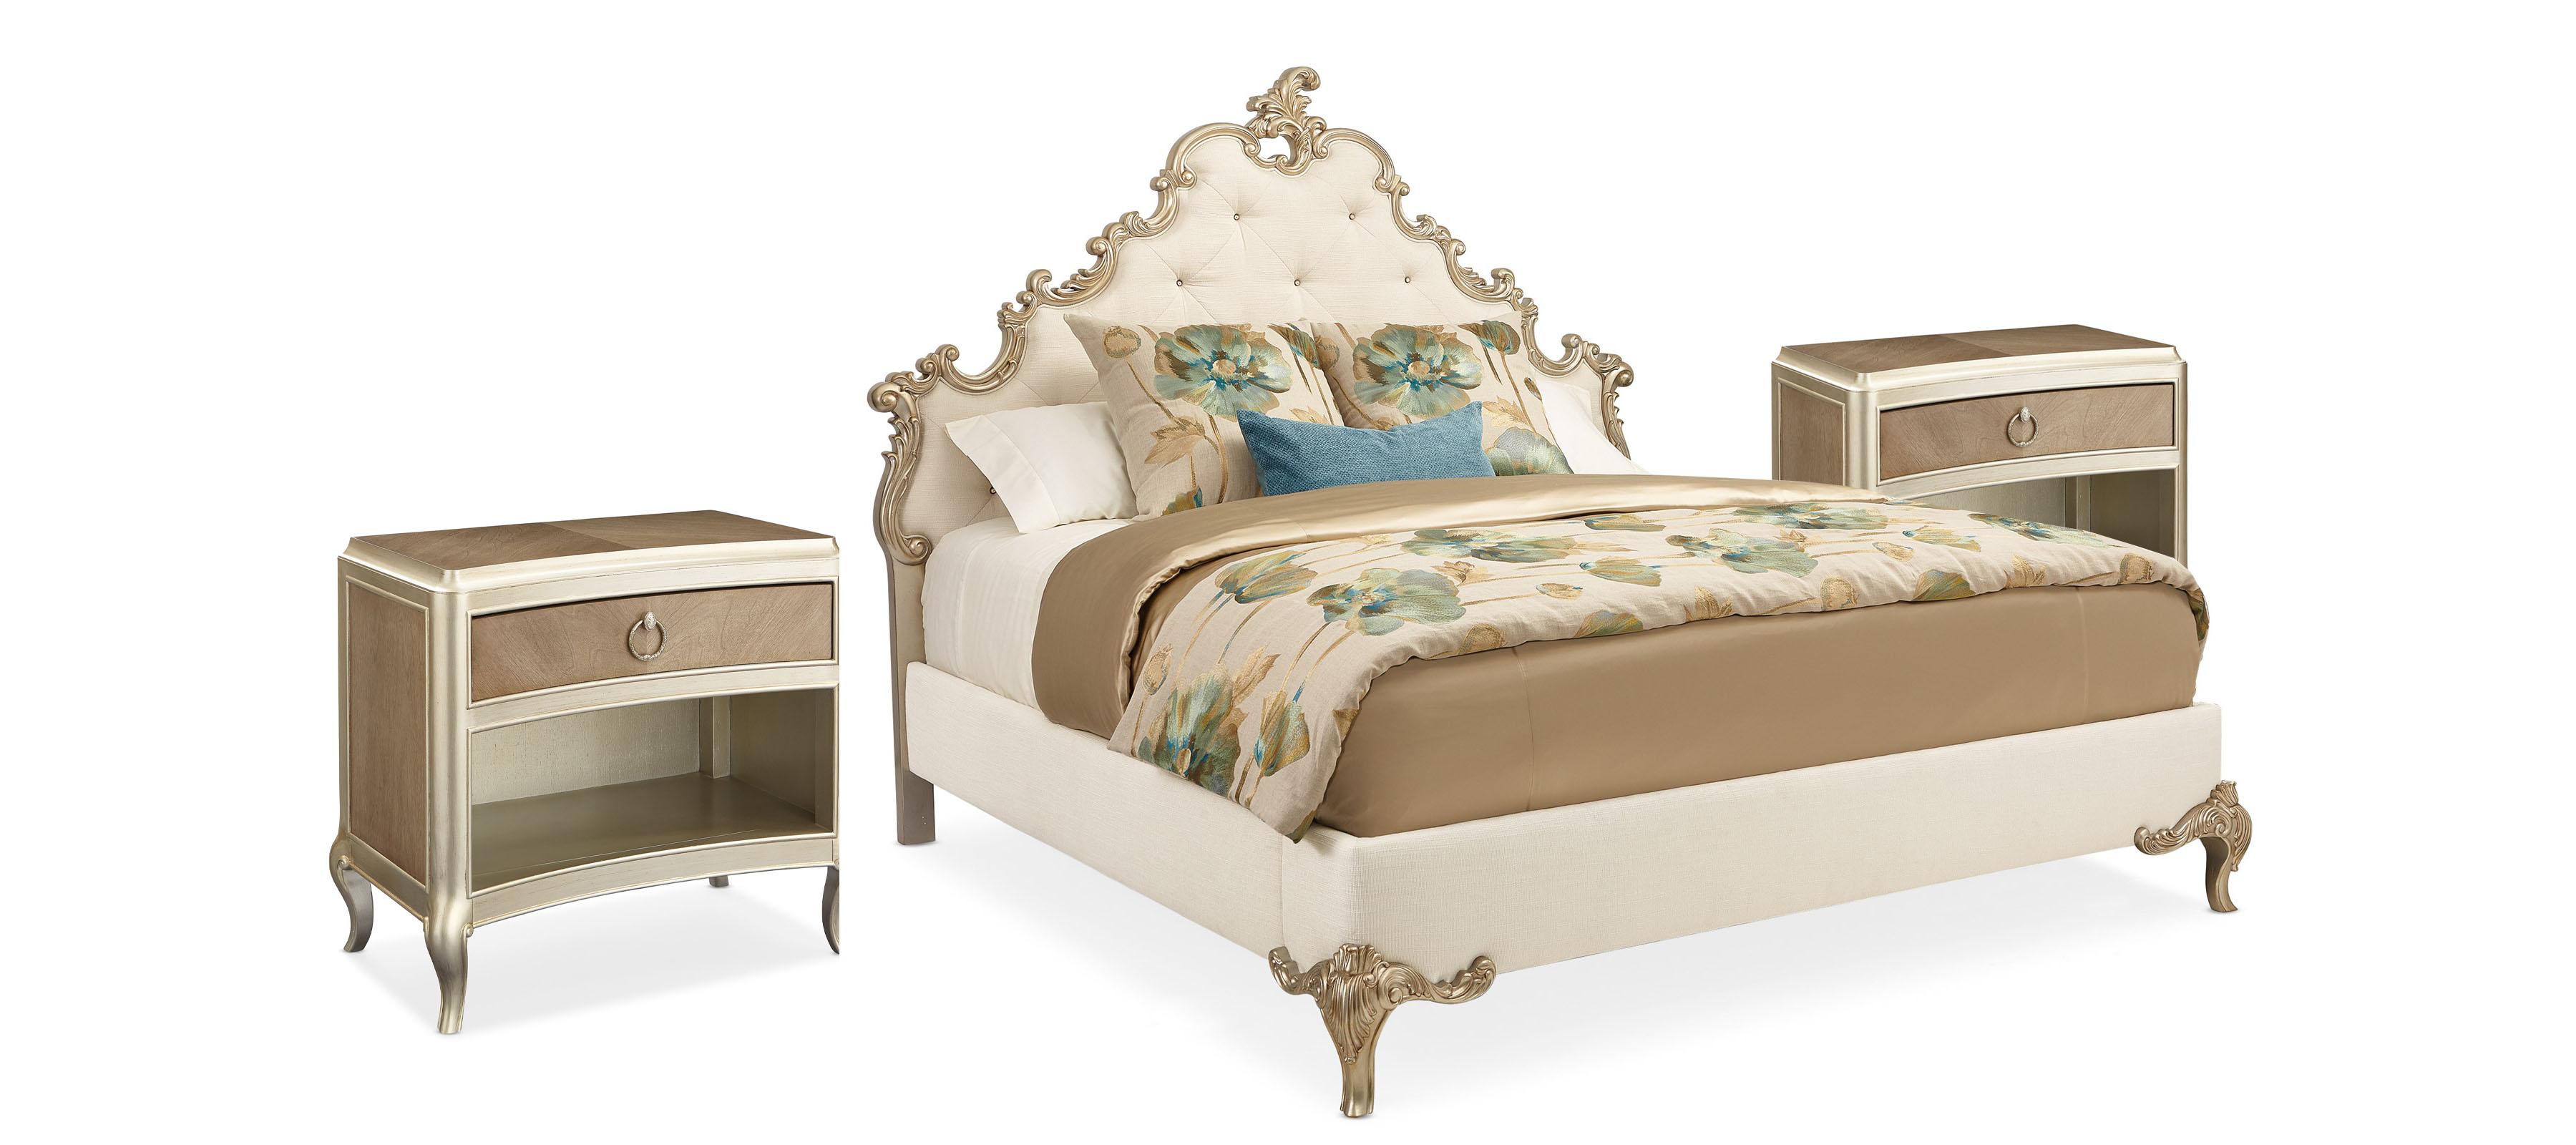 Traditional Panel Bedroom Set FONTAINEBLEAU C063-419-121-Set-3 in Cream, Gold Fabric